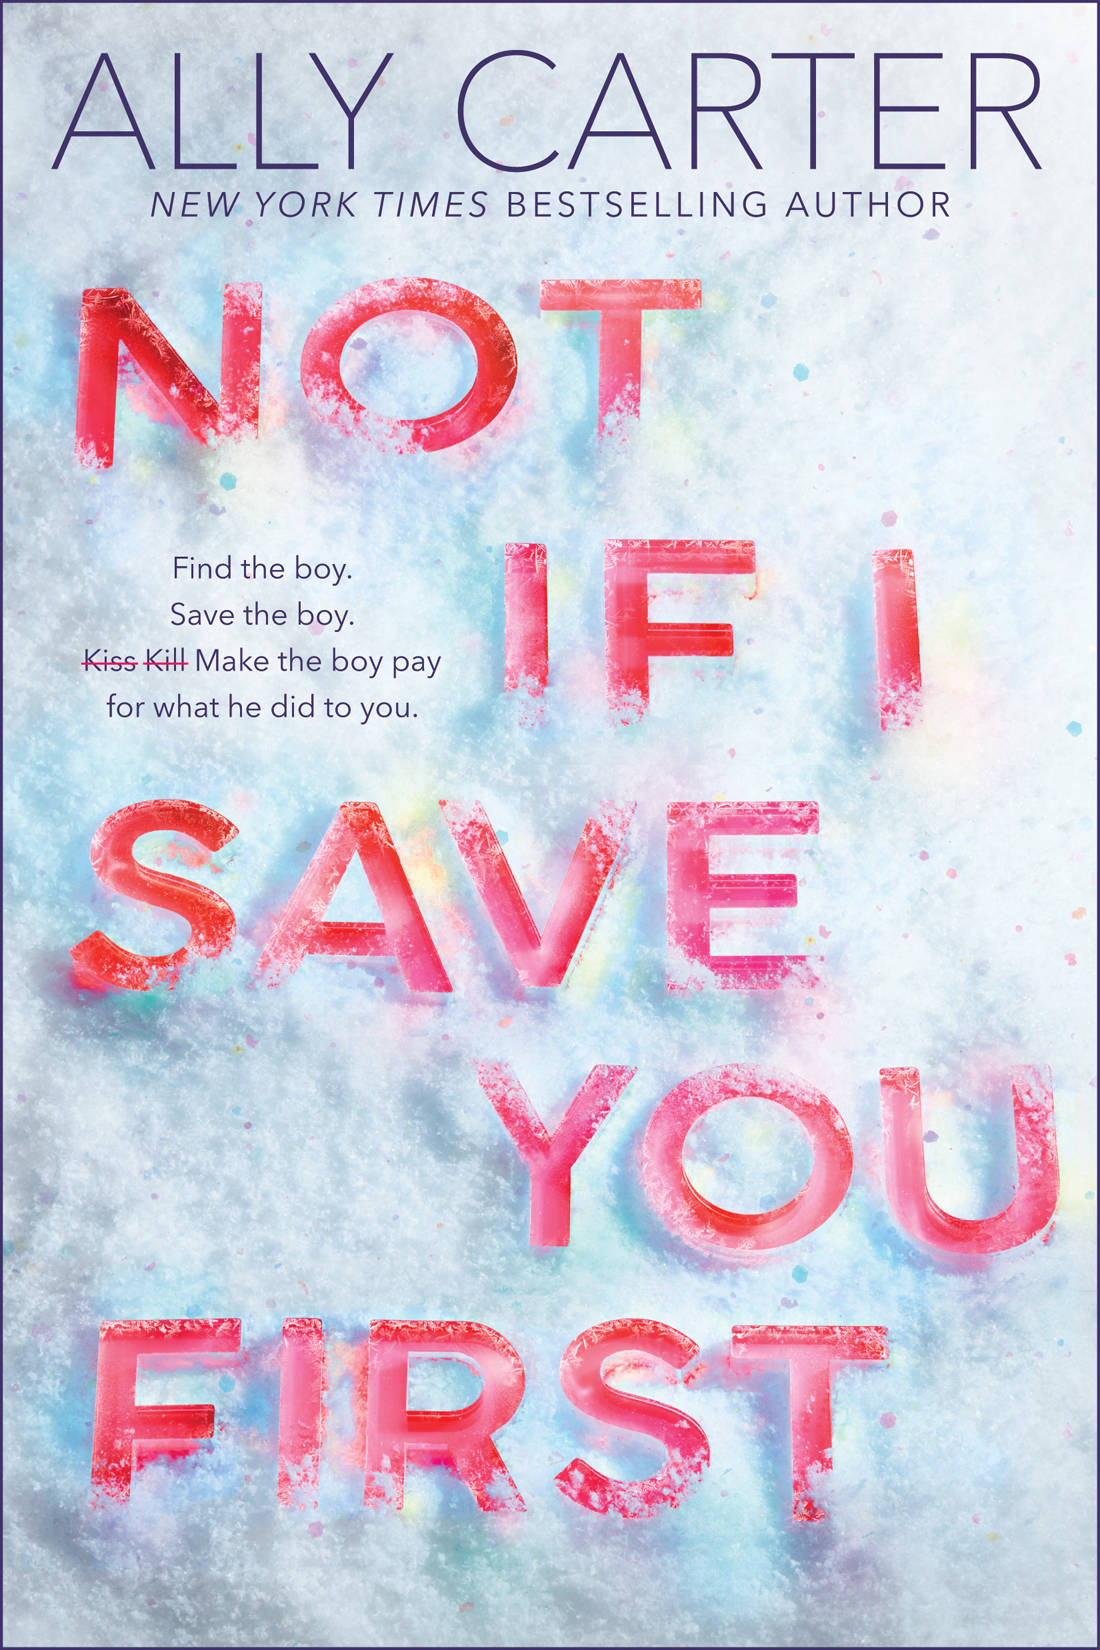 Cover of “Not if I Save You First” by Ally Carter. Courtesy image.